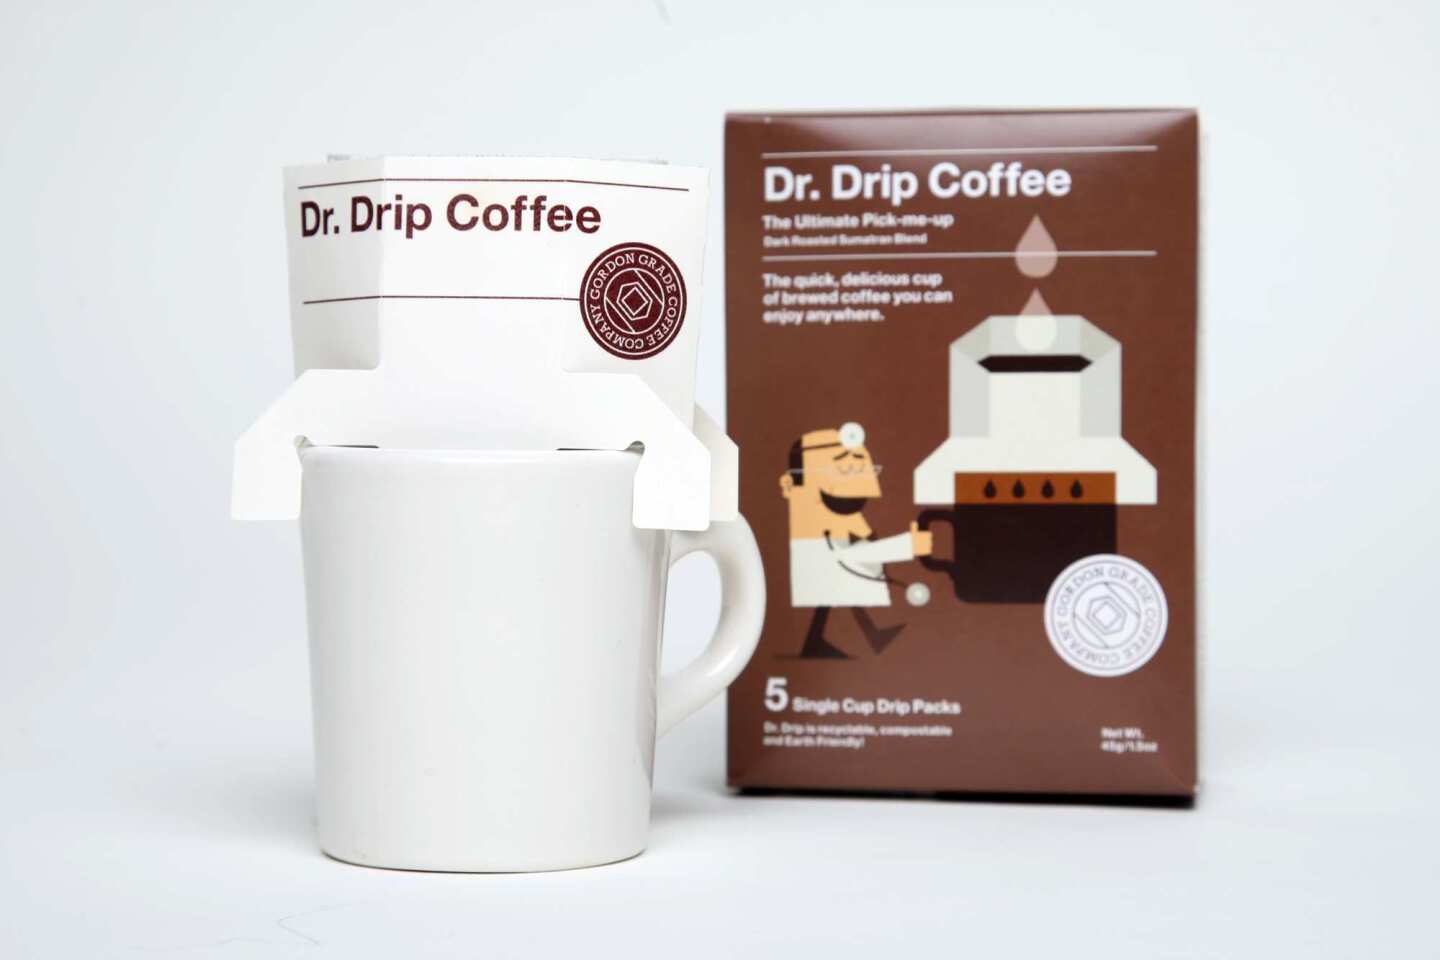 The reason: Even if you double the number of pouches you plop in your hotel room coffee maker, your cuppa joe still tastes like swill. Enter Dr. Drip packets, which allow you to brew an individual cup. They're not those noxious coffee singles that taste like rainwater runoff but actual ground coffee, in a filter, through which you pour hot water as it rests stands on a little cardboard stand. Thank you, sir. May I have another? Comes in several blends, including decaf. The price: $8.99 for five packets. The details: www.drdripcoffee.com. -- Catharine Hamm